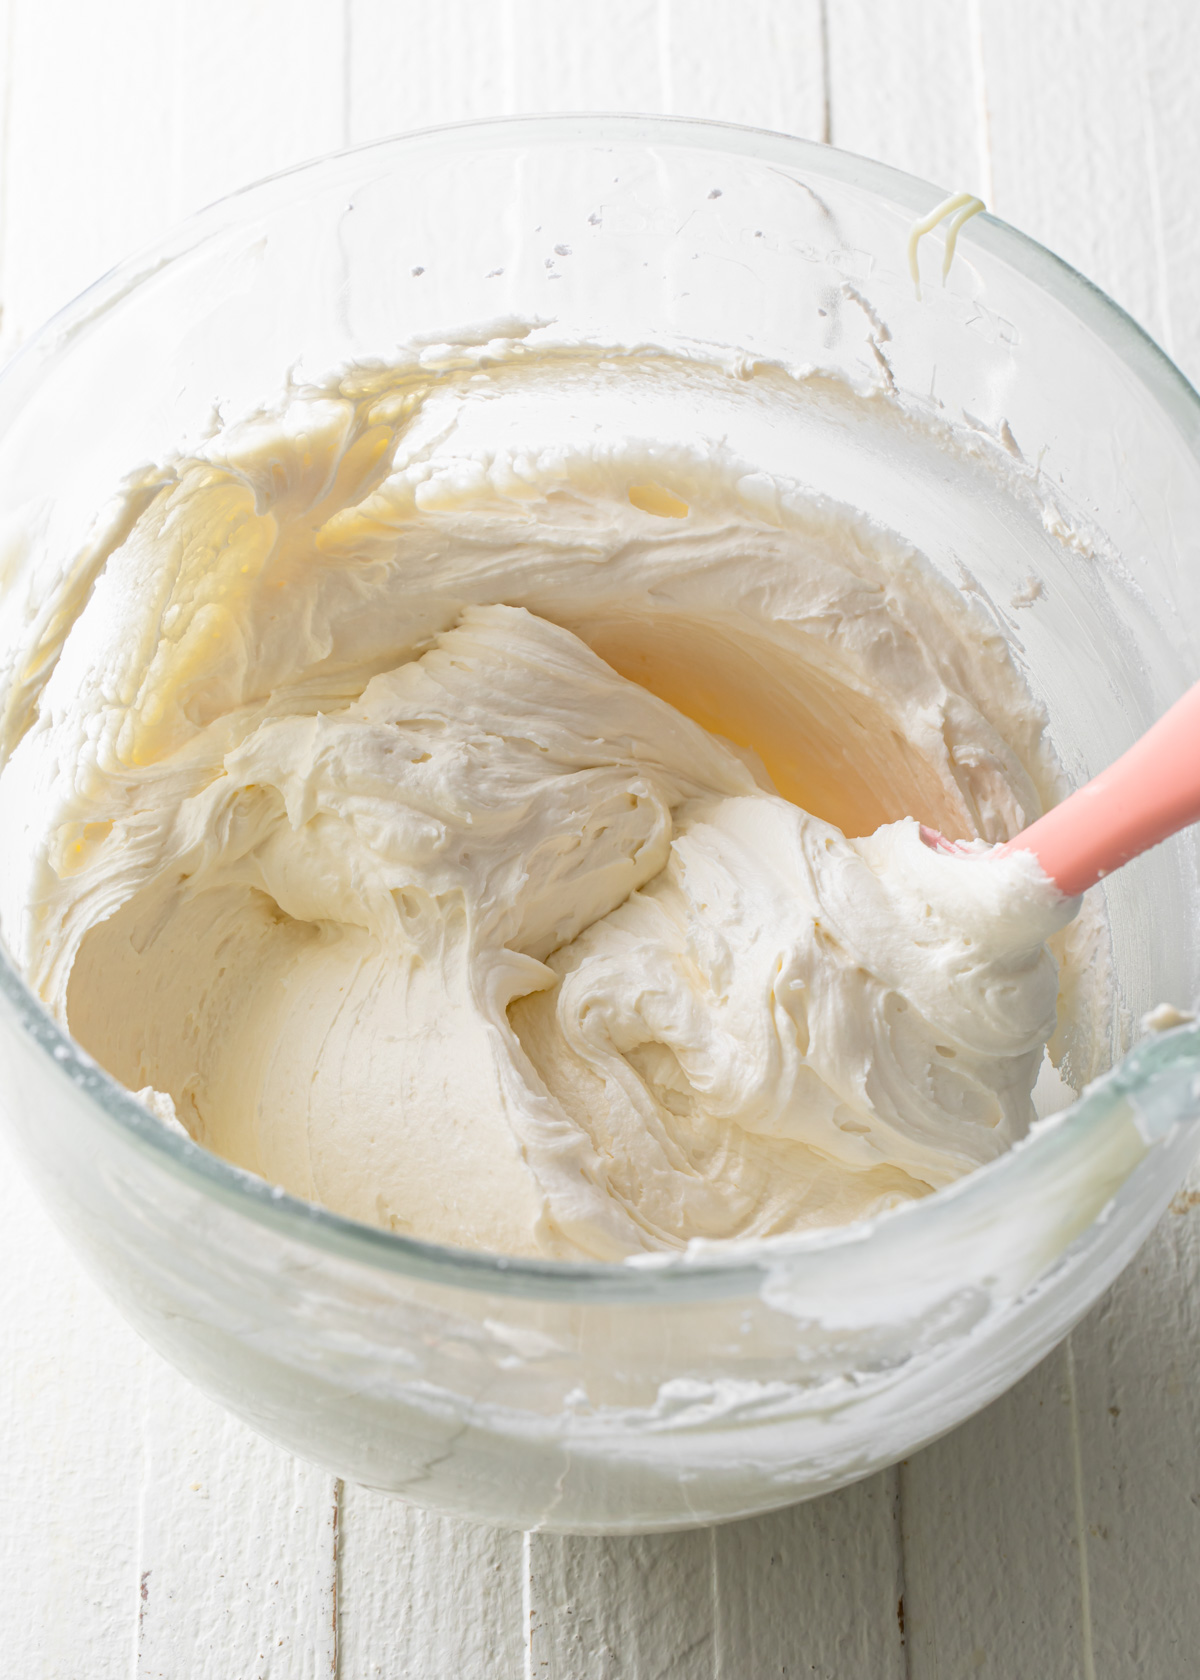 Whipped white chocolate frosting that is ready to spread onto cakes or cupcakes